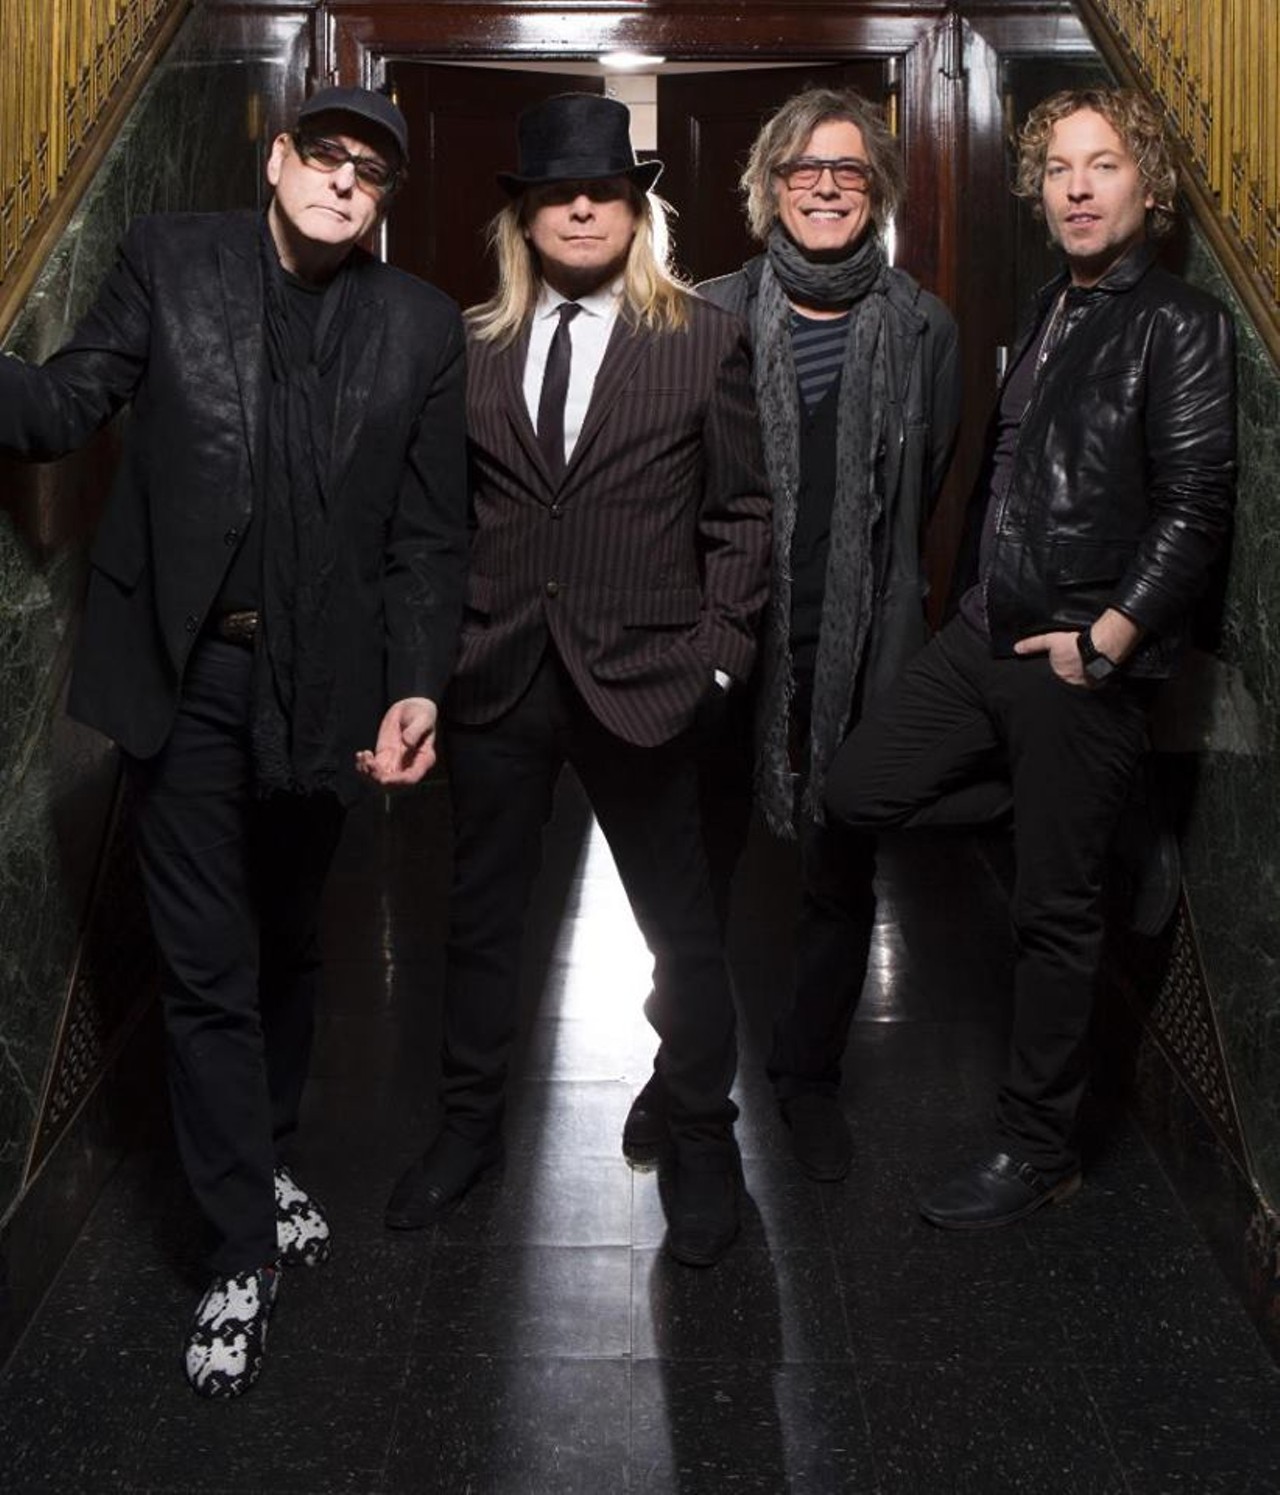 "I Want You to Want Me" comes from Cheap Trick's second album, "In Color" released in 1977. It reached No. 7 on the Billboard Hot 100, but rocks fans in the Netherlands, Belgium and Japan thought it was No. 1 worthy. I was also No. 3 in Canada.